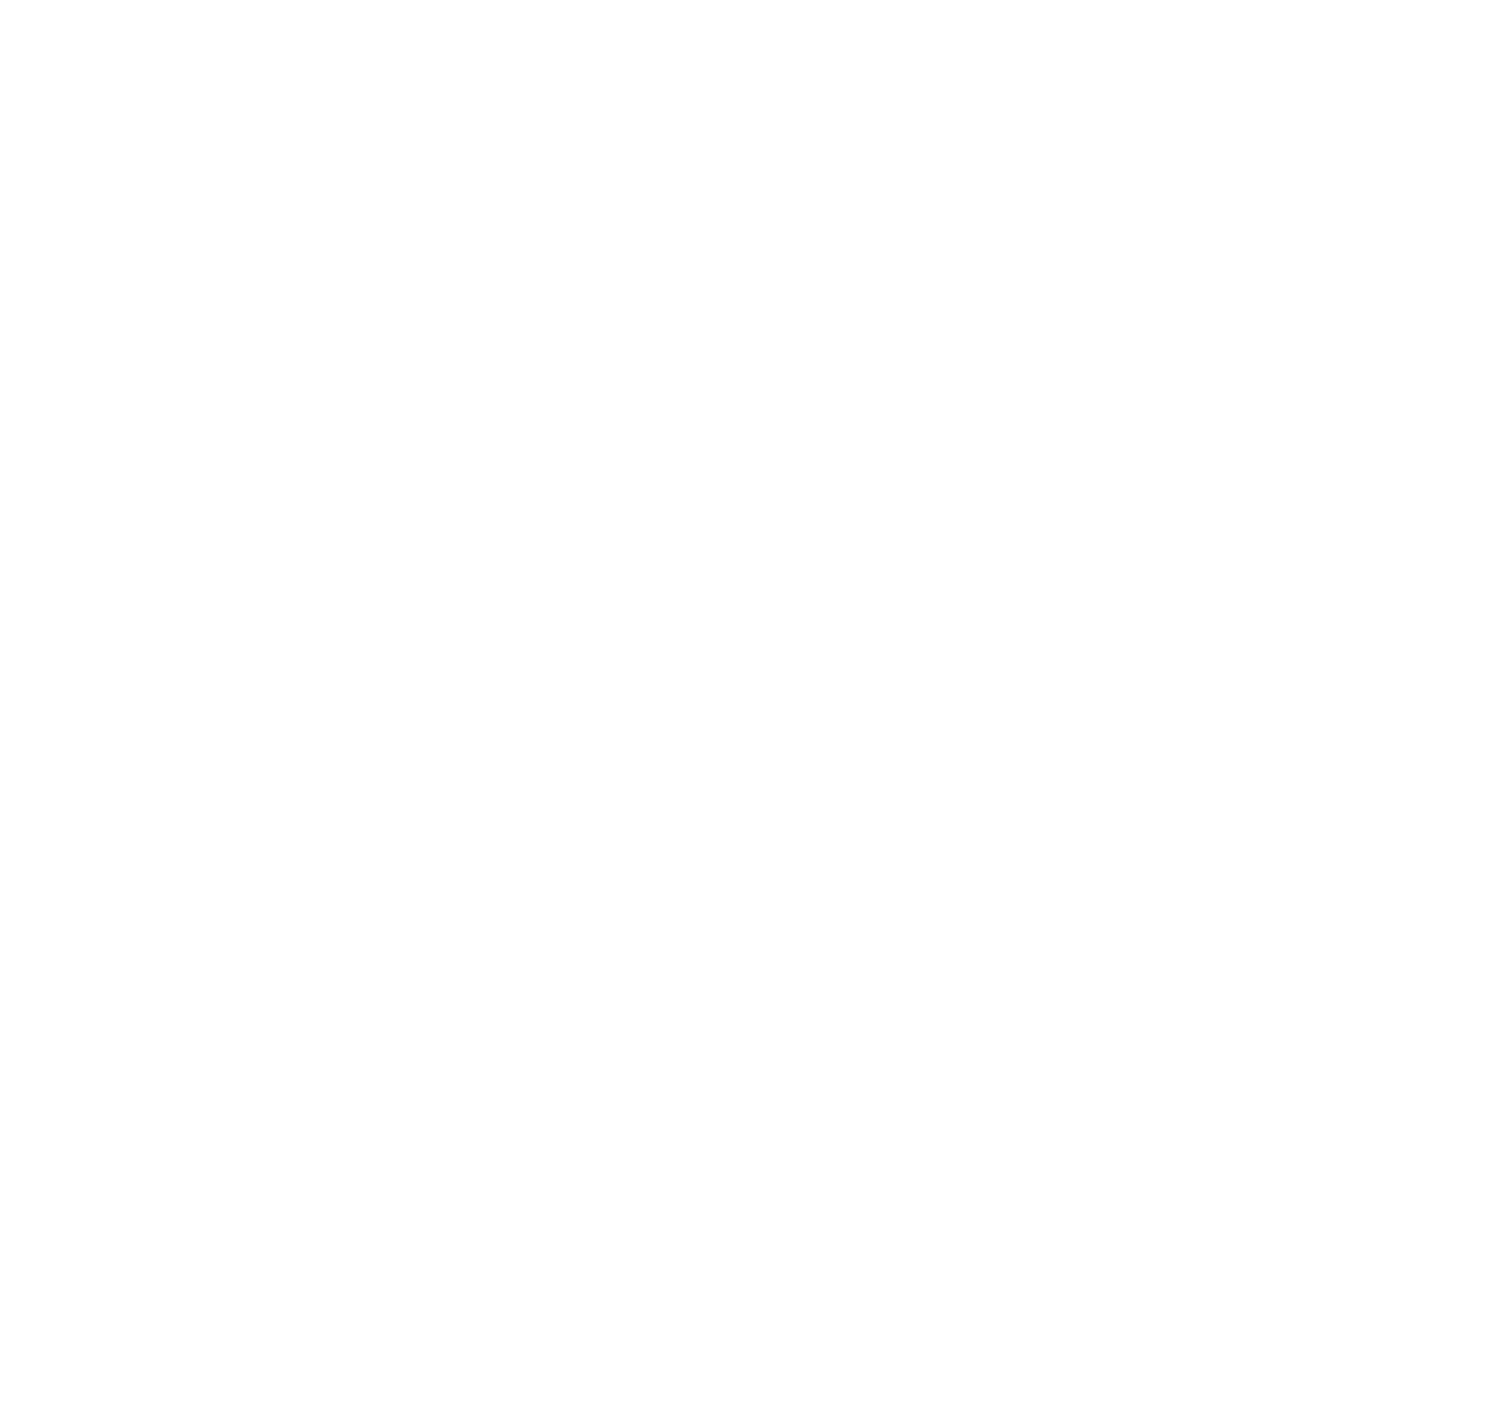 Golf with Freedom